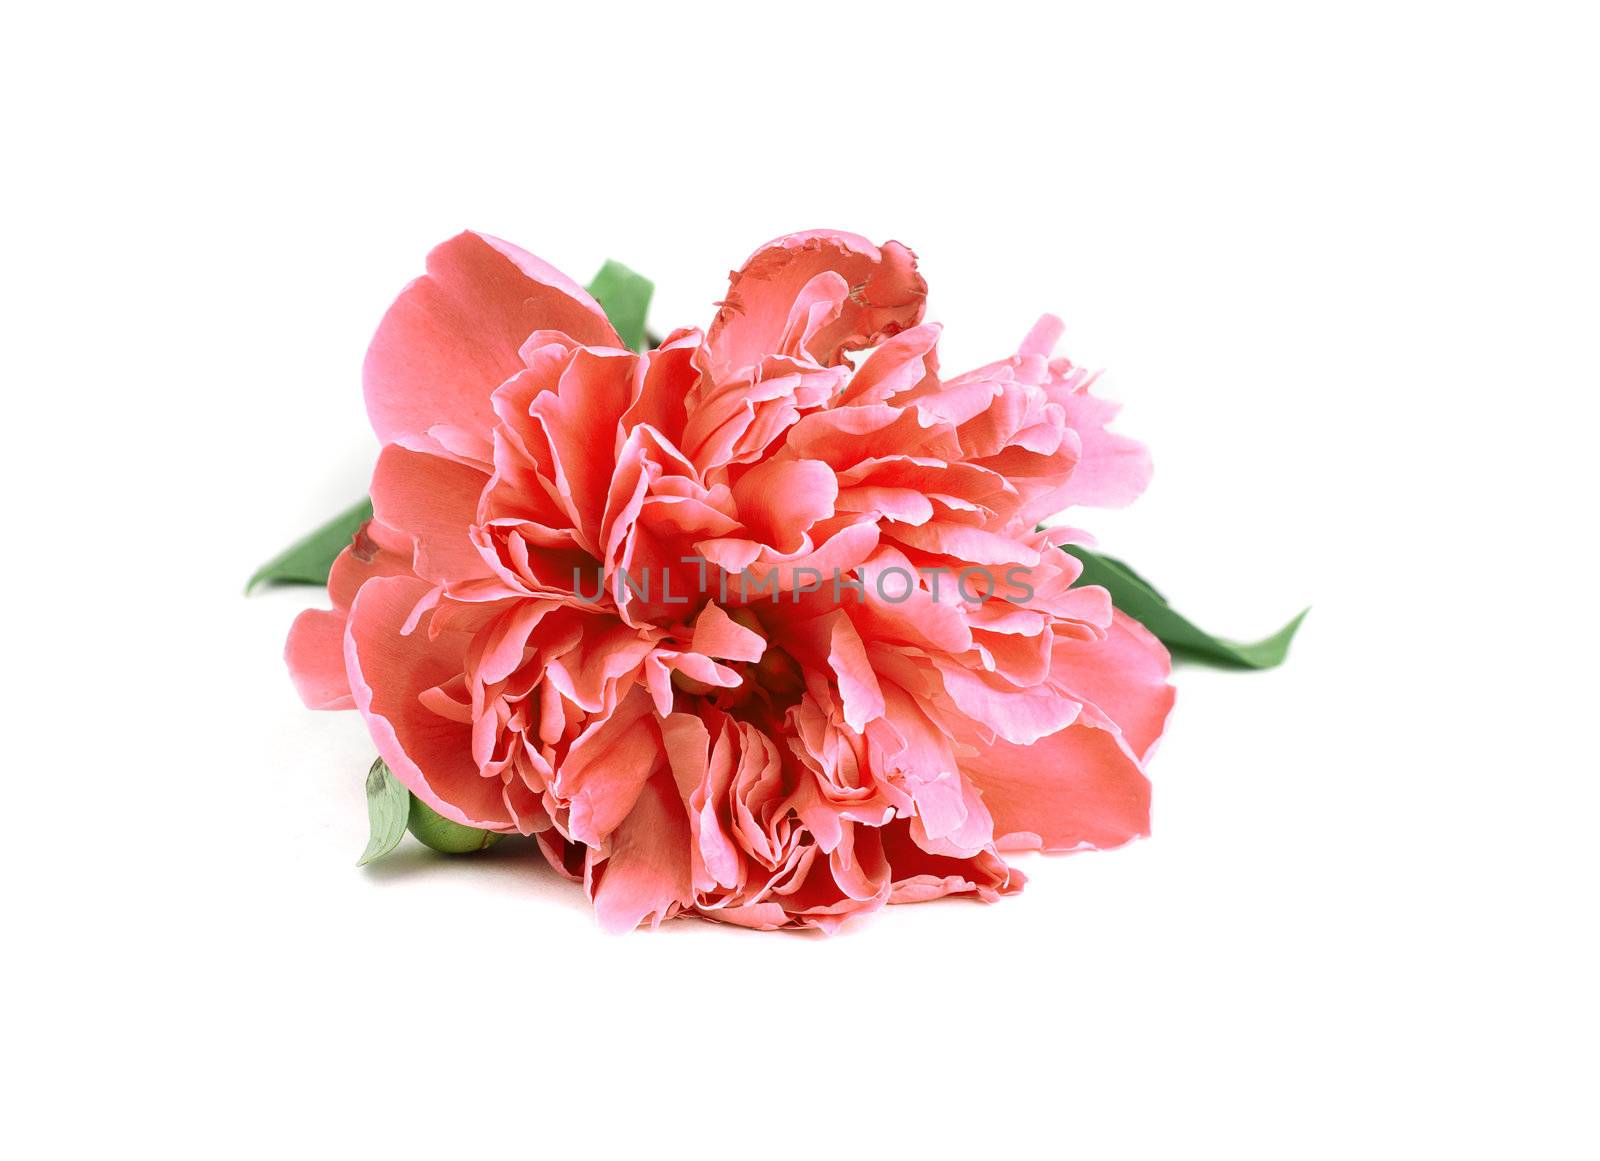 One Pink Peony with leafs on white background